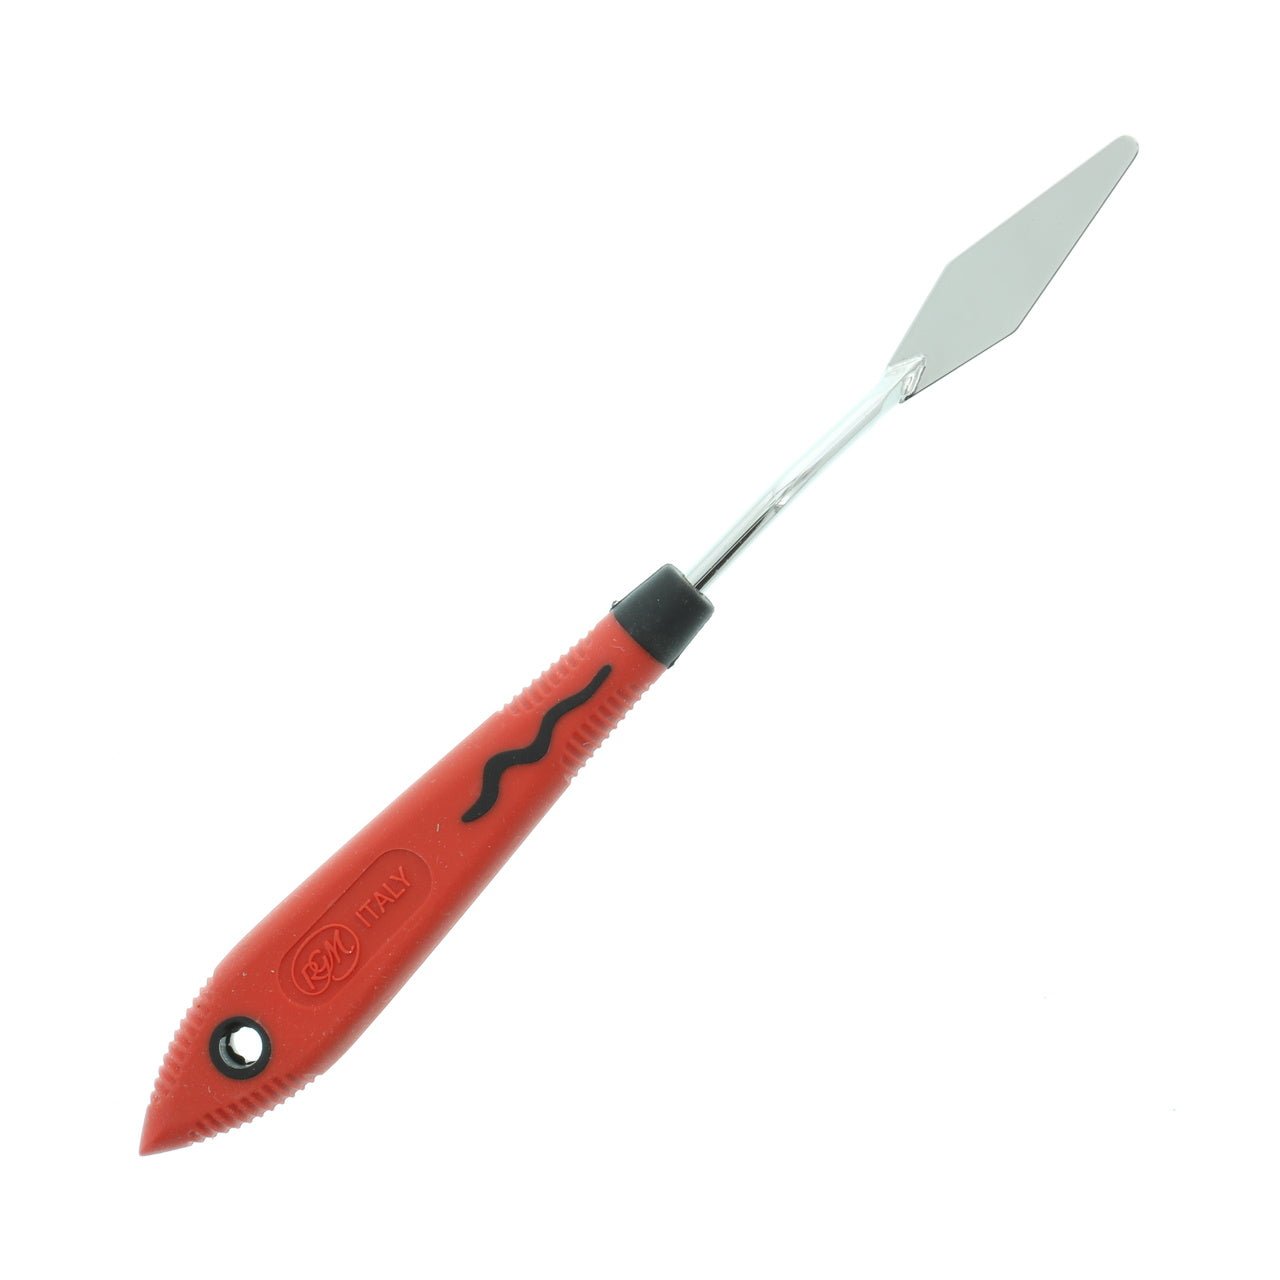 RGM Soft Grip Painting Knife #044 (Red Handle)